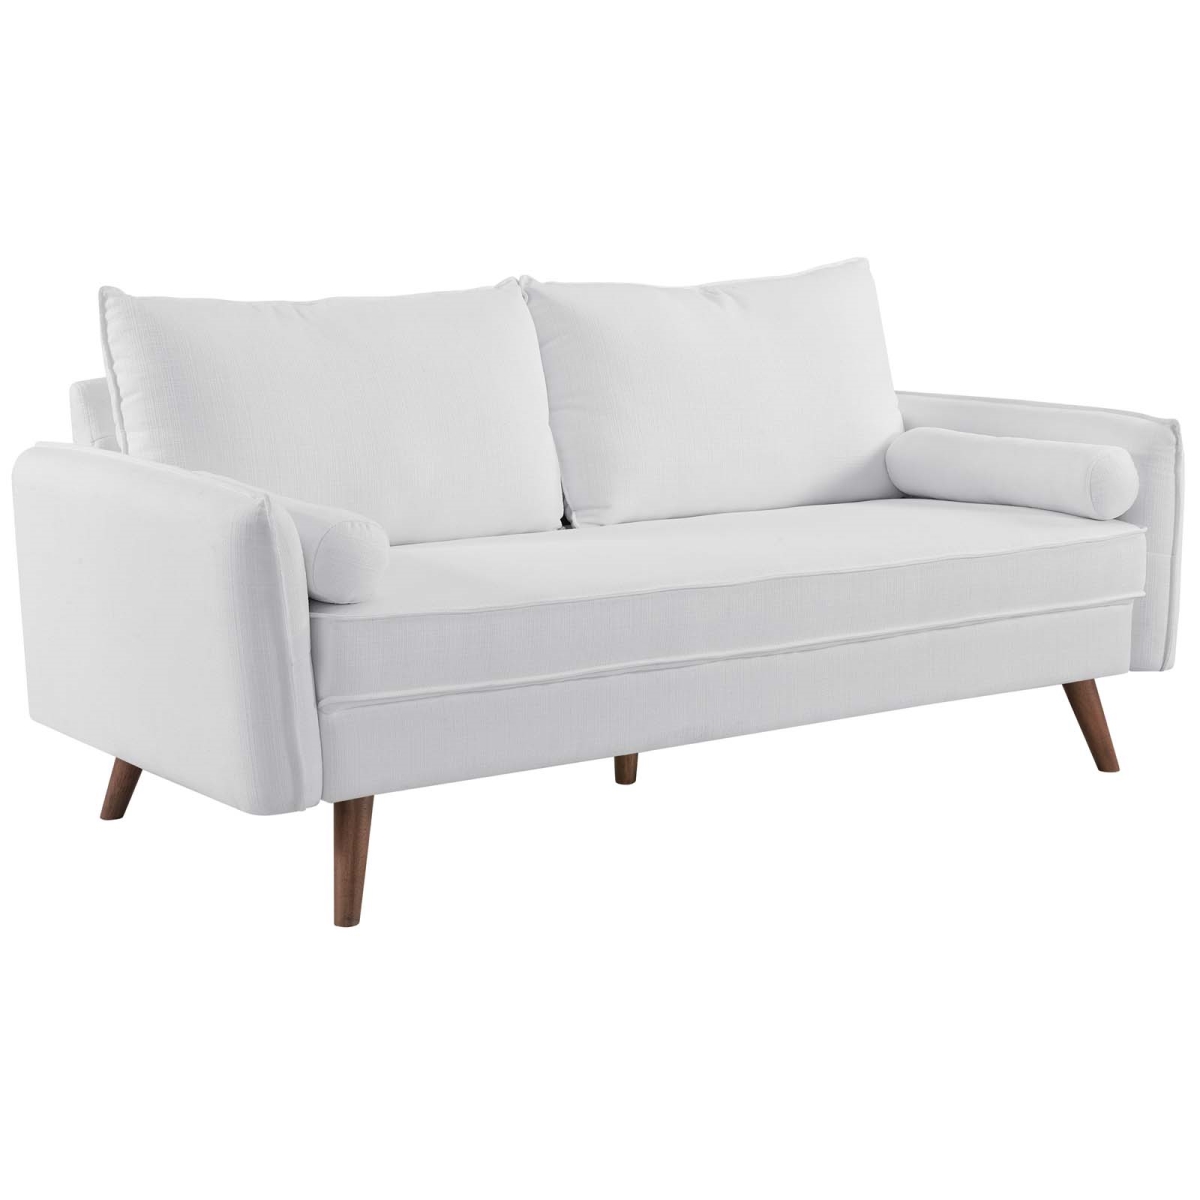 Eei-3092-whi Revive Upholstered Fabric Sofa - White, 33.5 X 72 X 32.5 In.